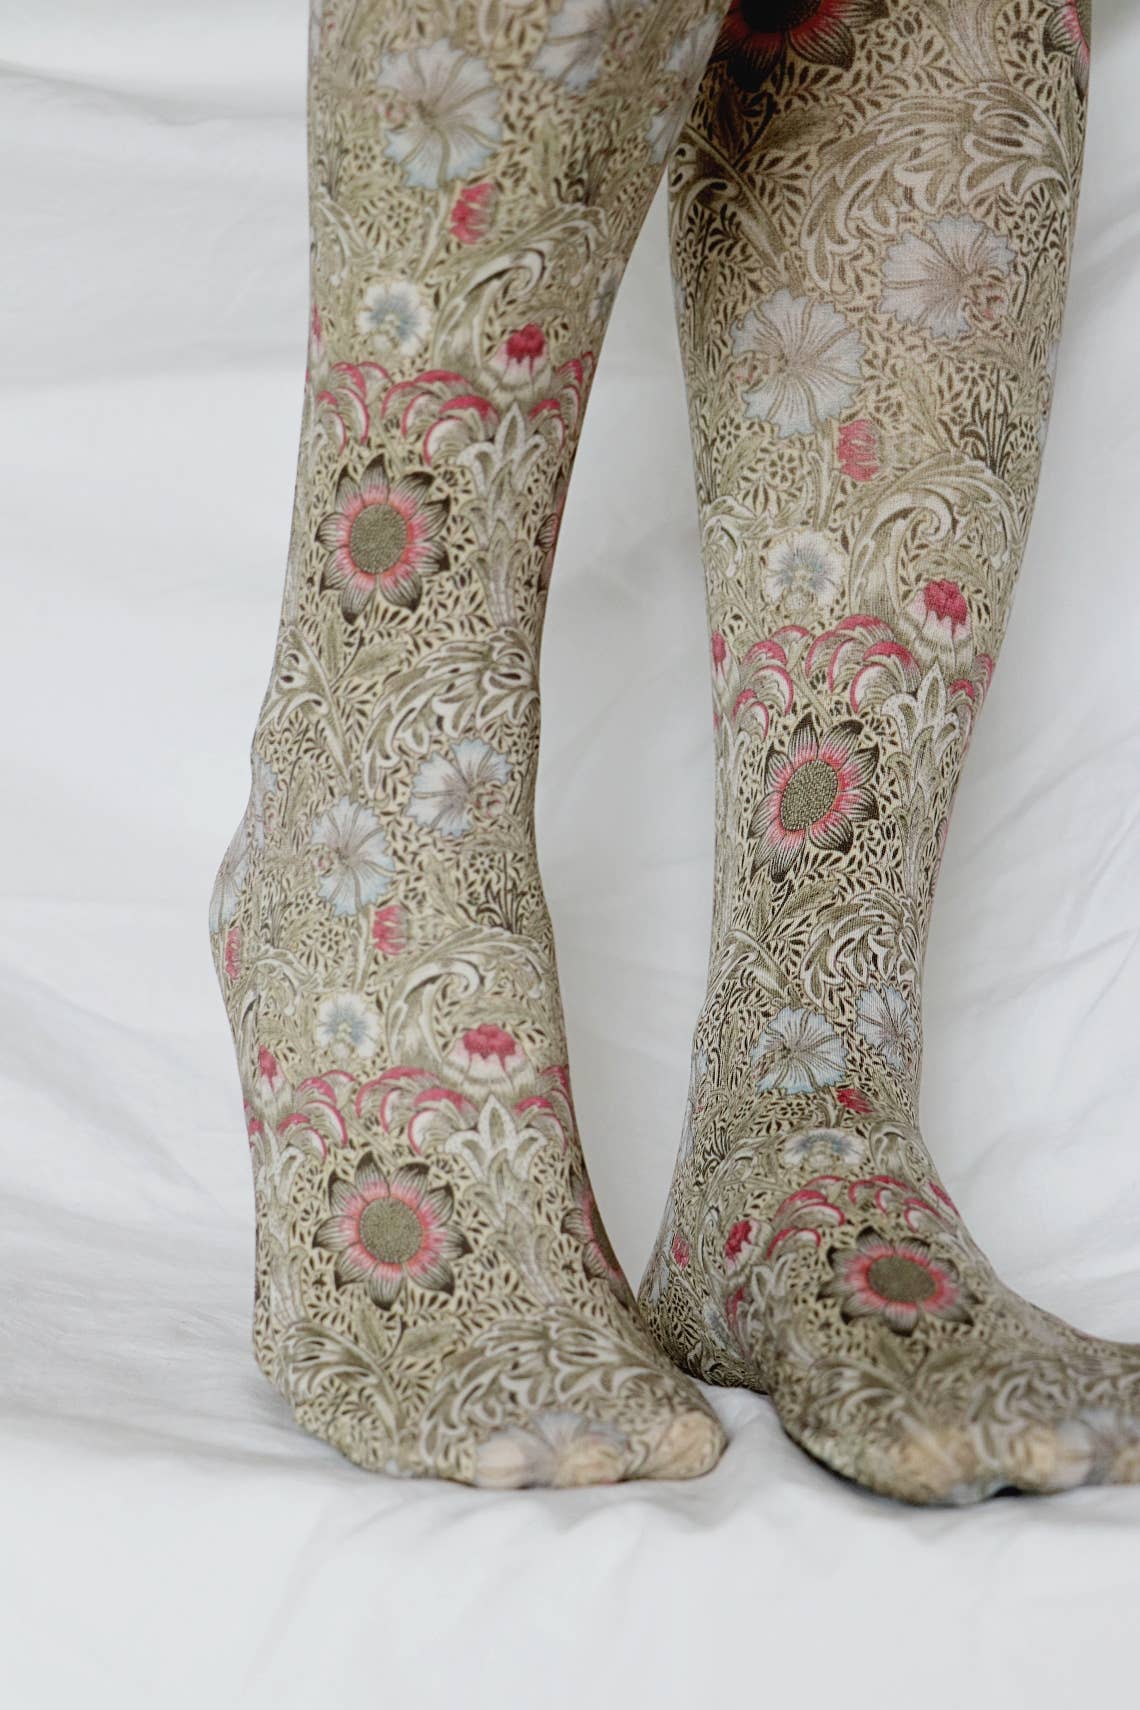 Instant Shipping! CORN COCKLE by WILLIAM MORRIS PRINTED TIGHTS